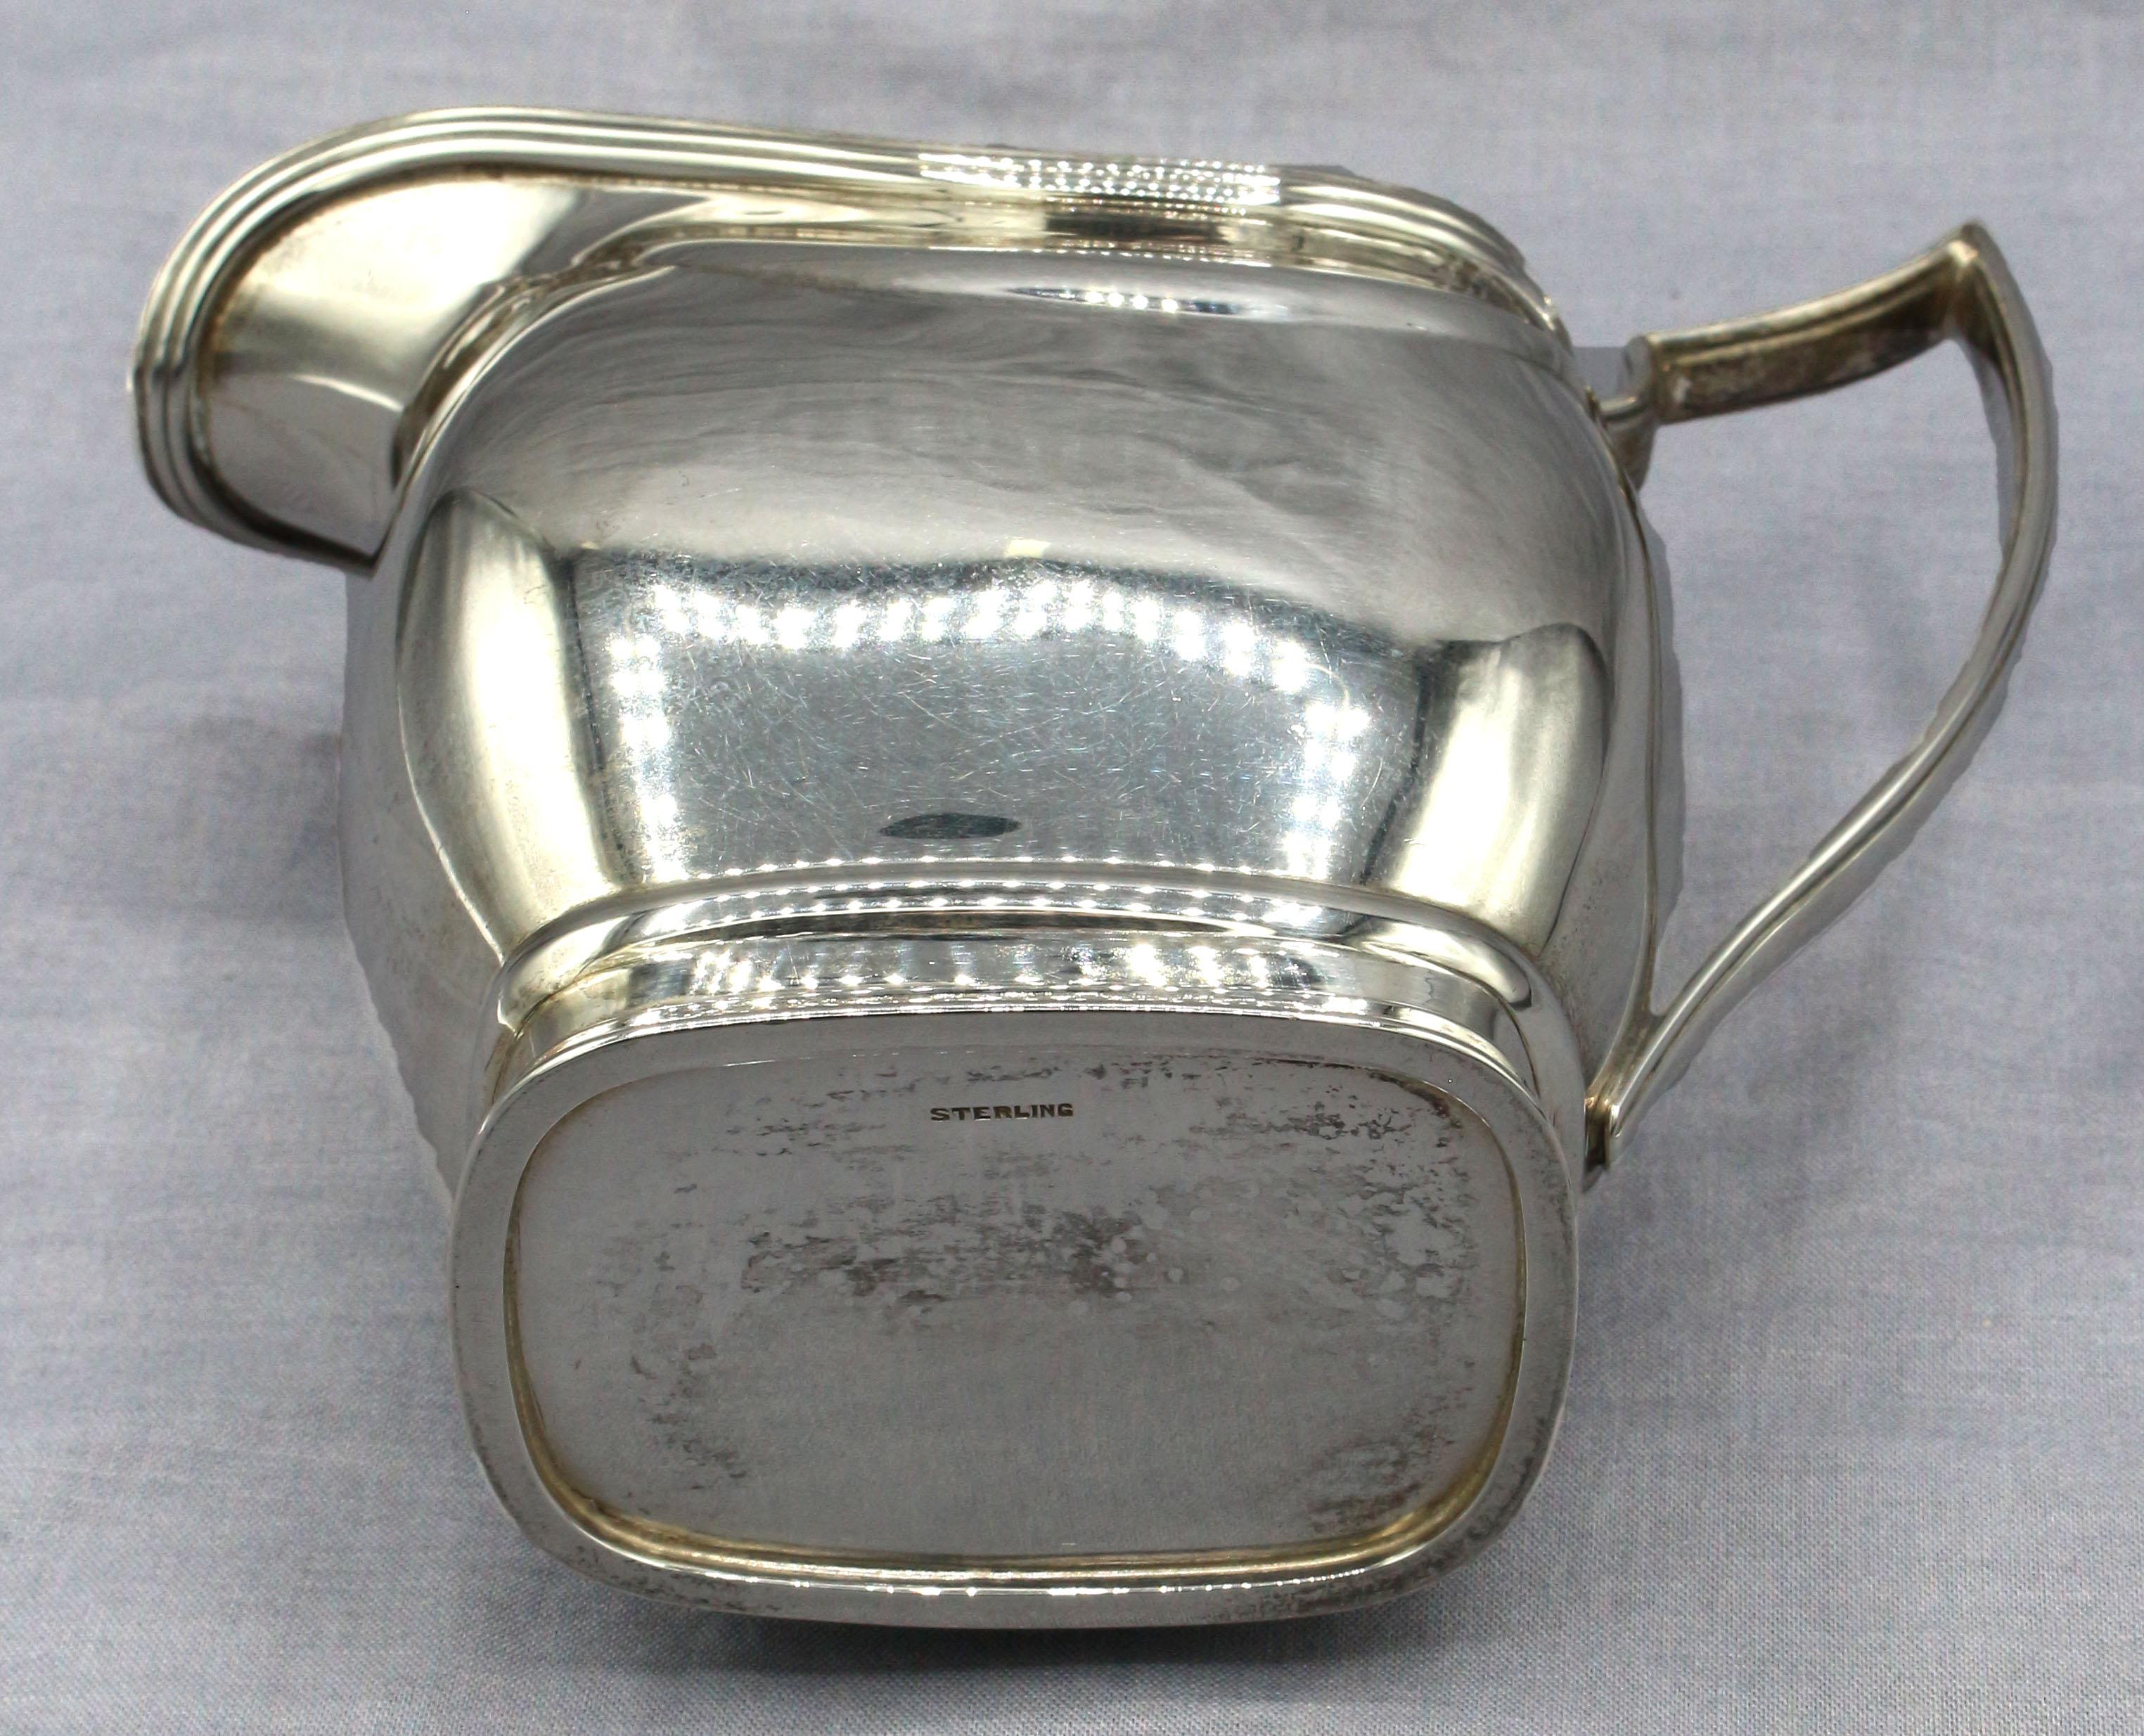 Sterling Silver 3-Piece Tea Set by Towle, circa 1900-30 5